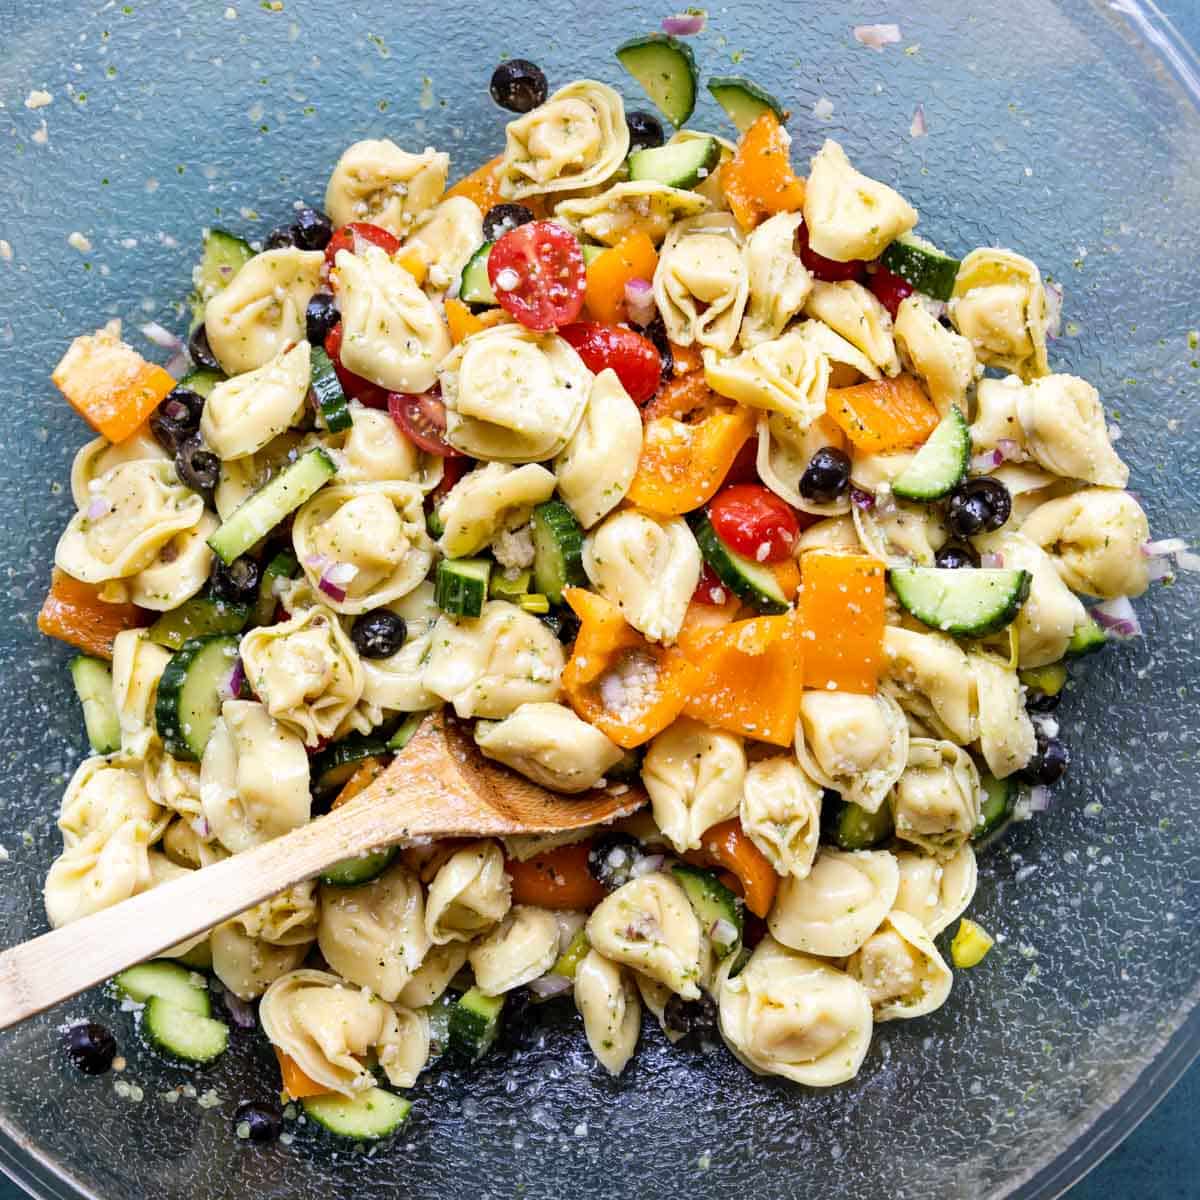 cheese tortellini with veggies, dressing and parmesan cheese